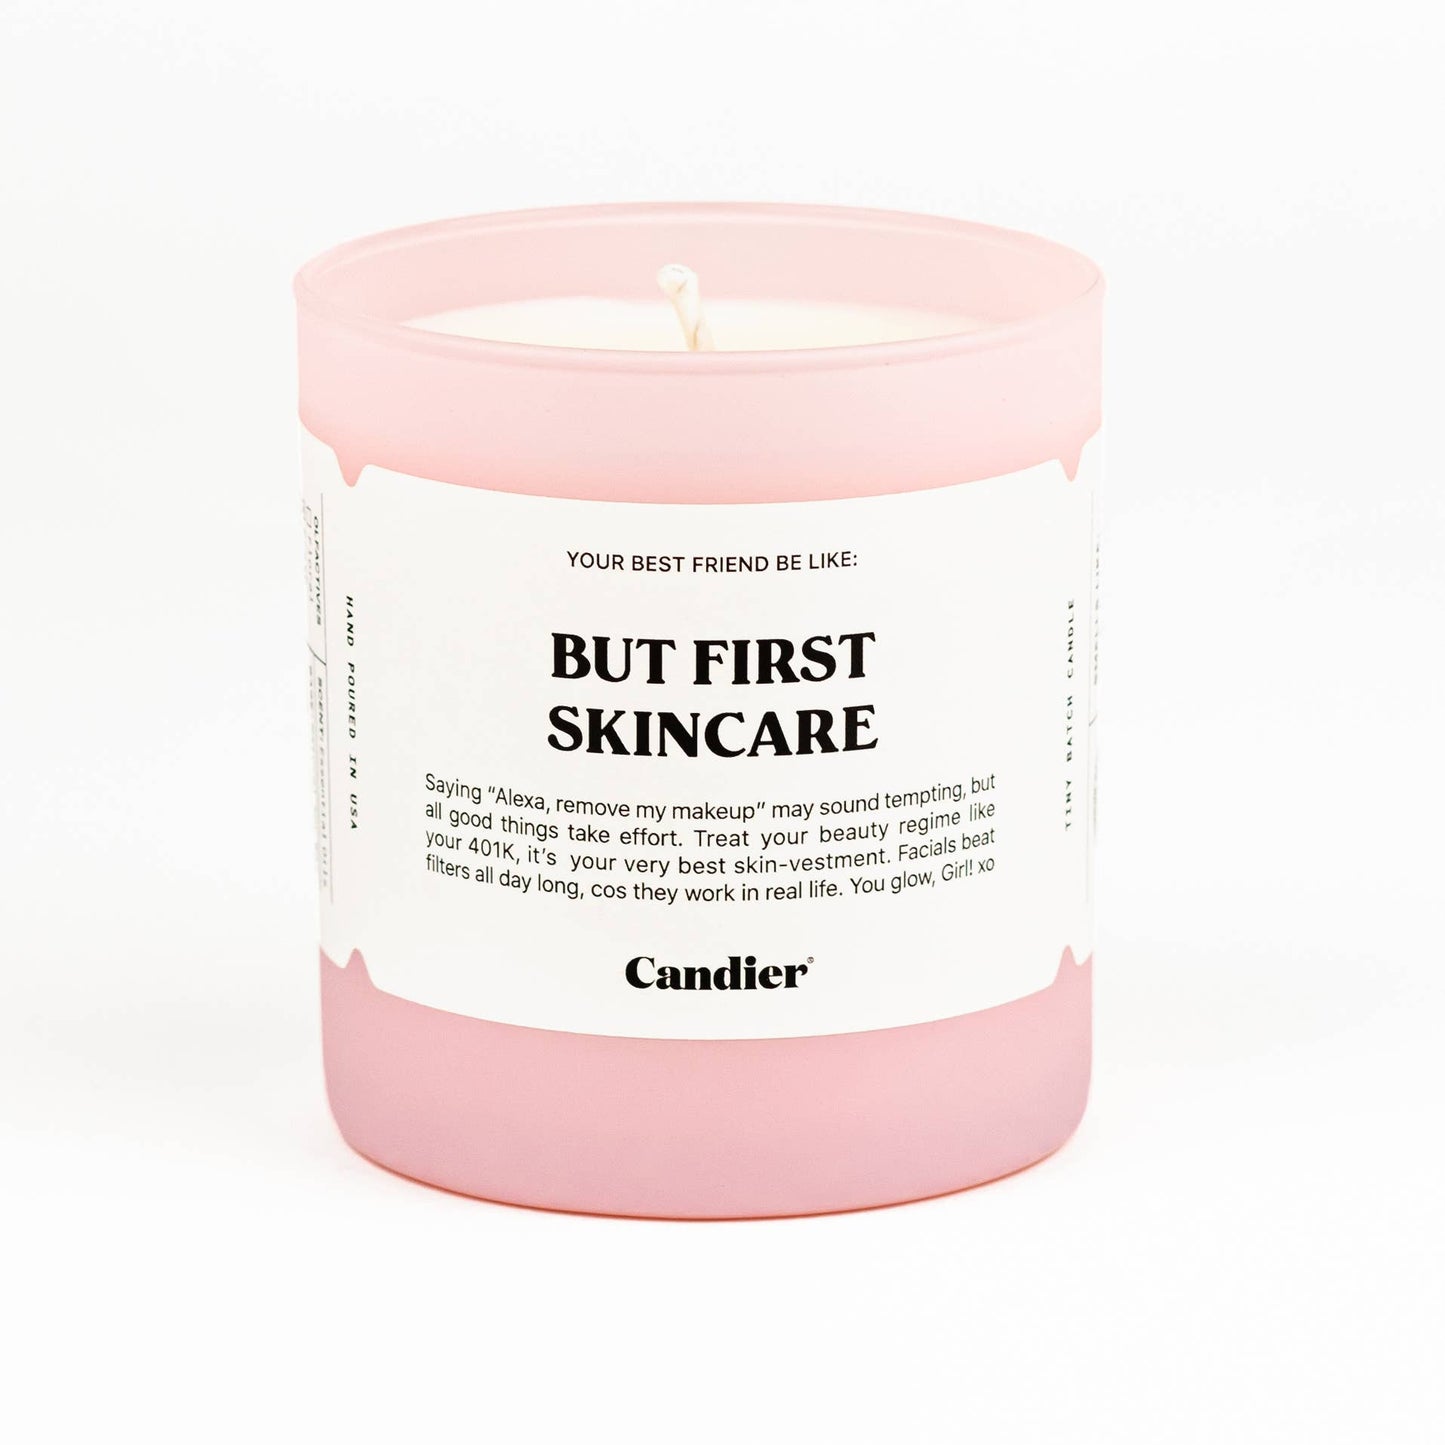 But First Skincare Candier 9oz Soy Candle